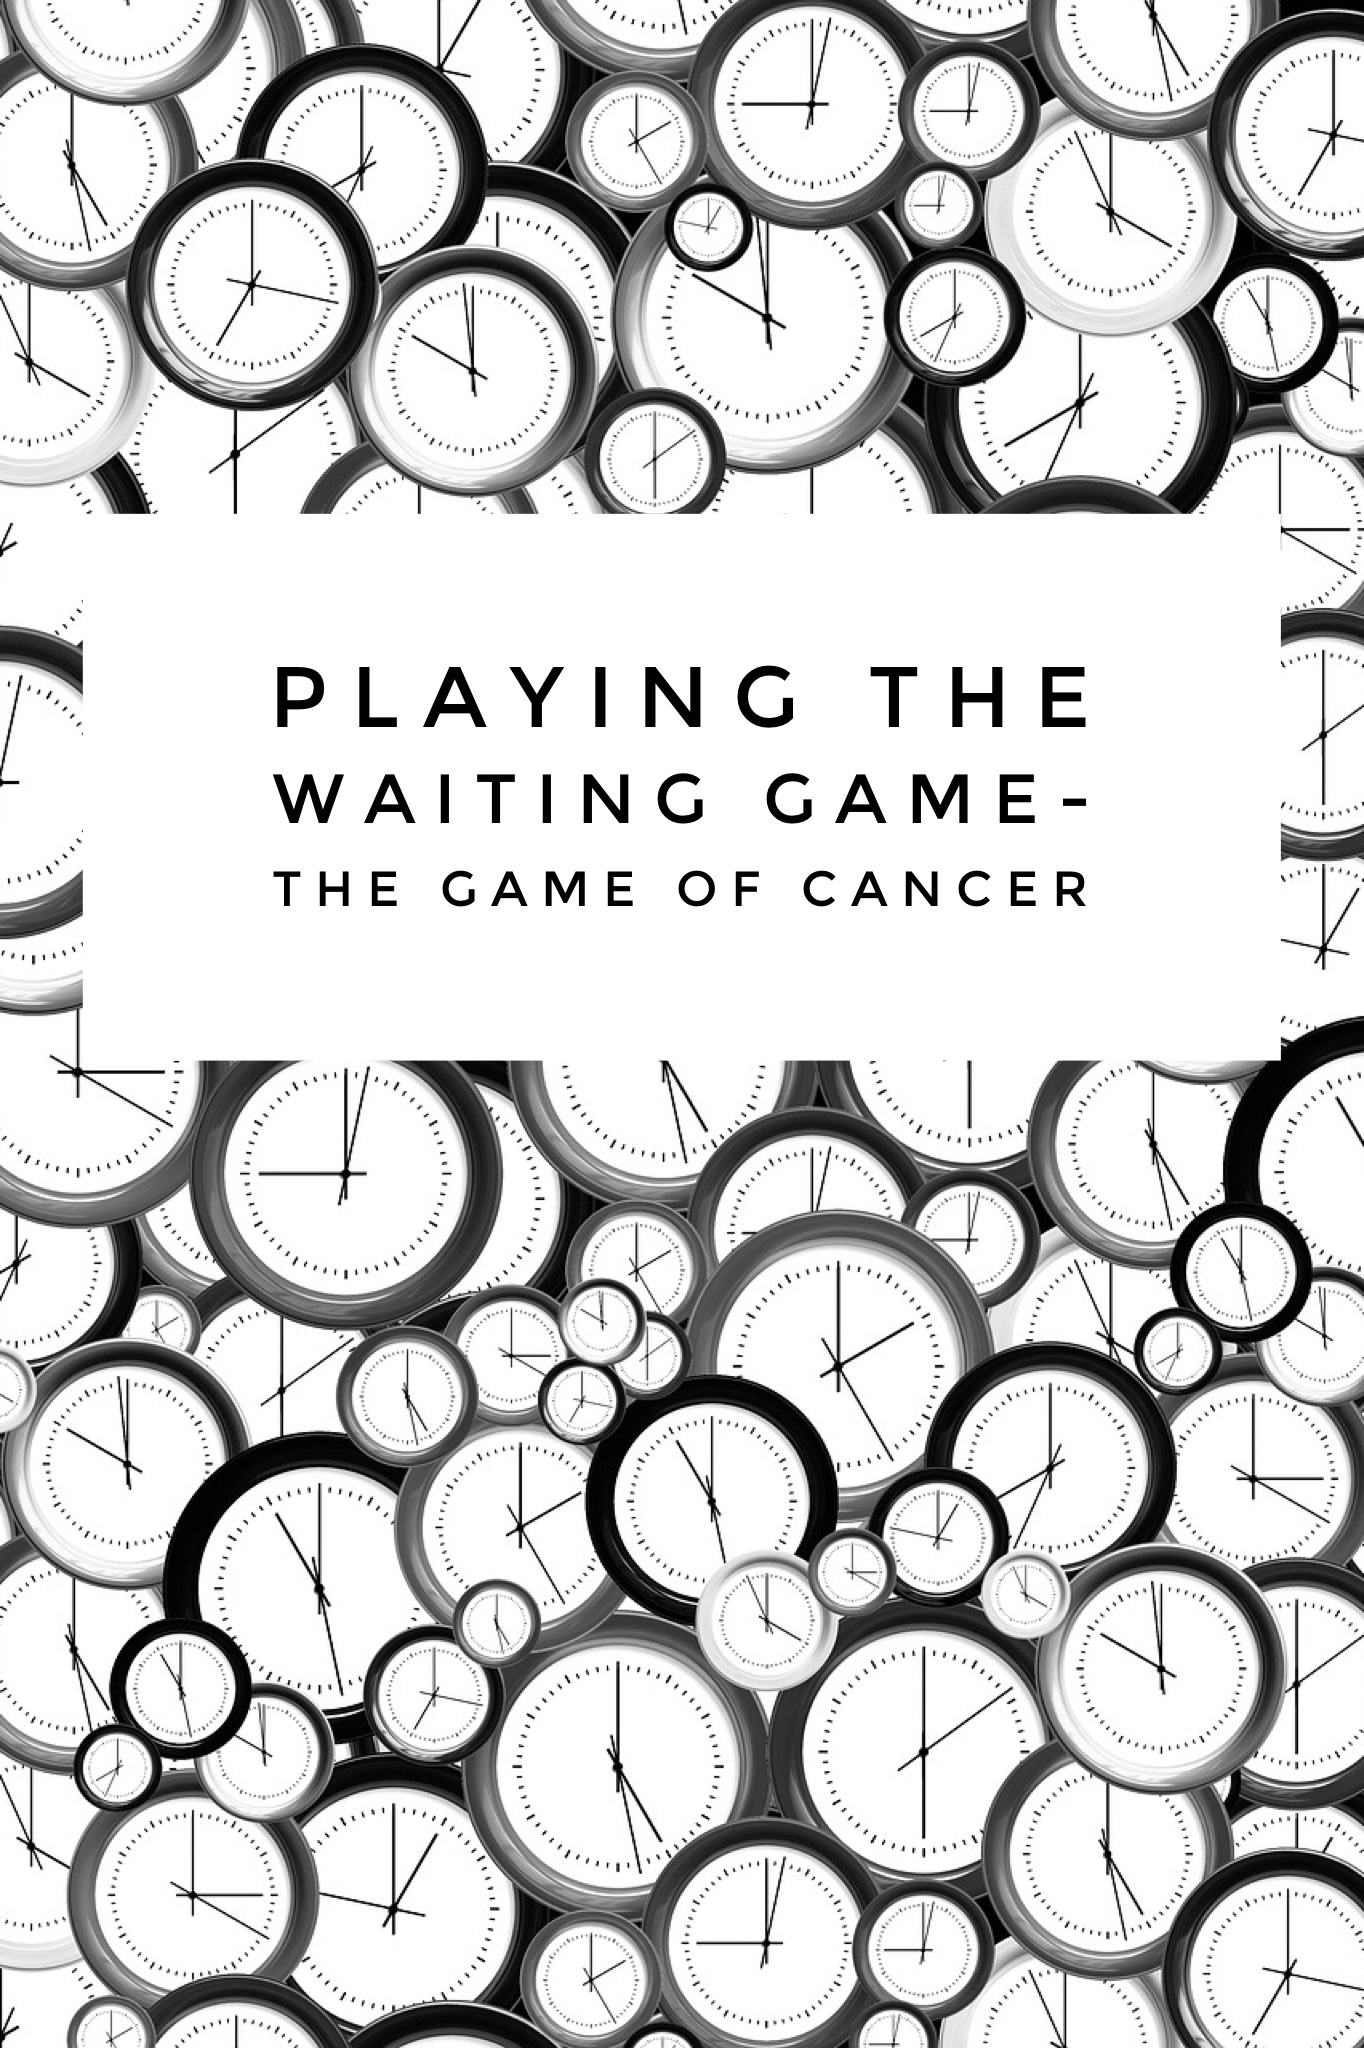 Playing The Waiting Game-The Game Of Cancer